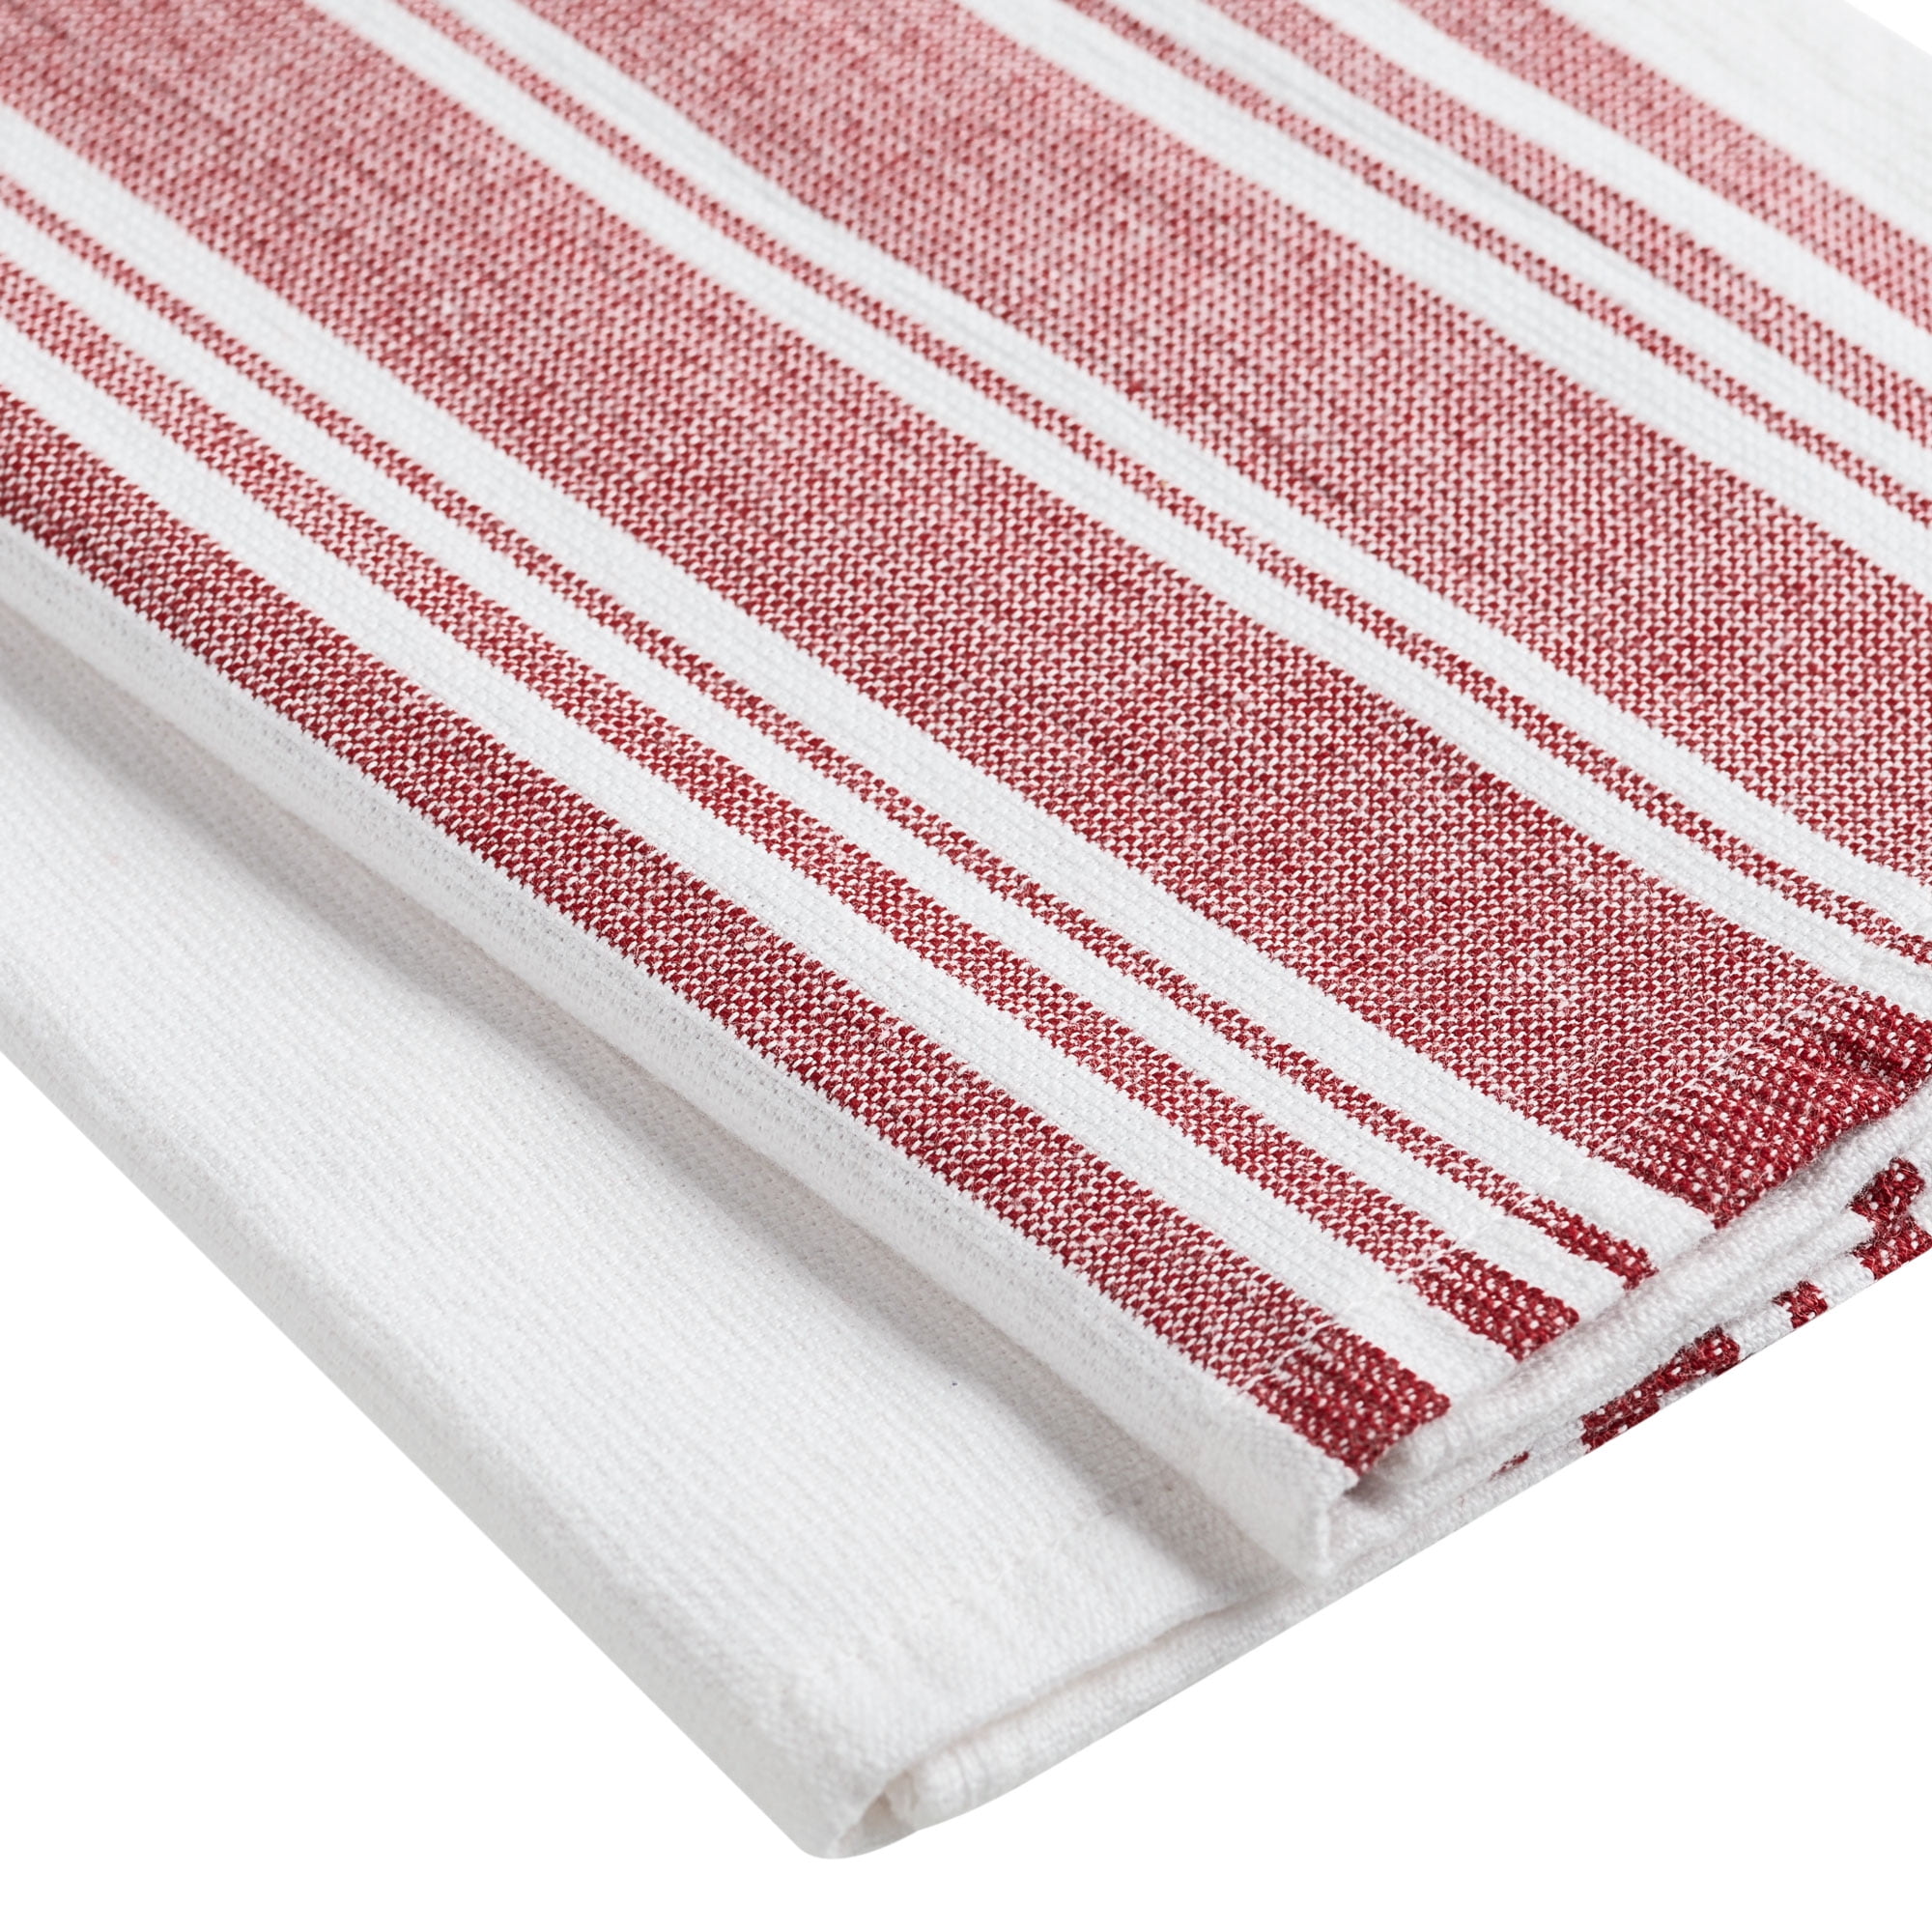 Better Homes & Gardens Kitchen Towel Set, Red, 4 Count 